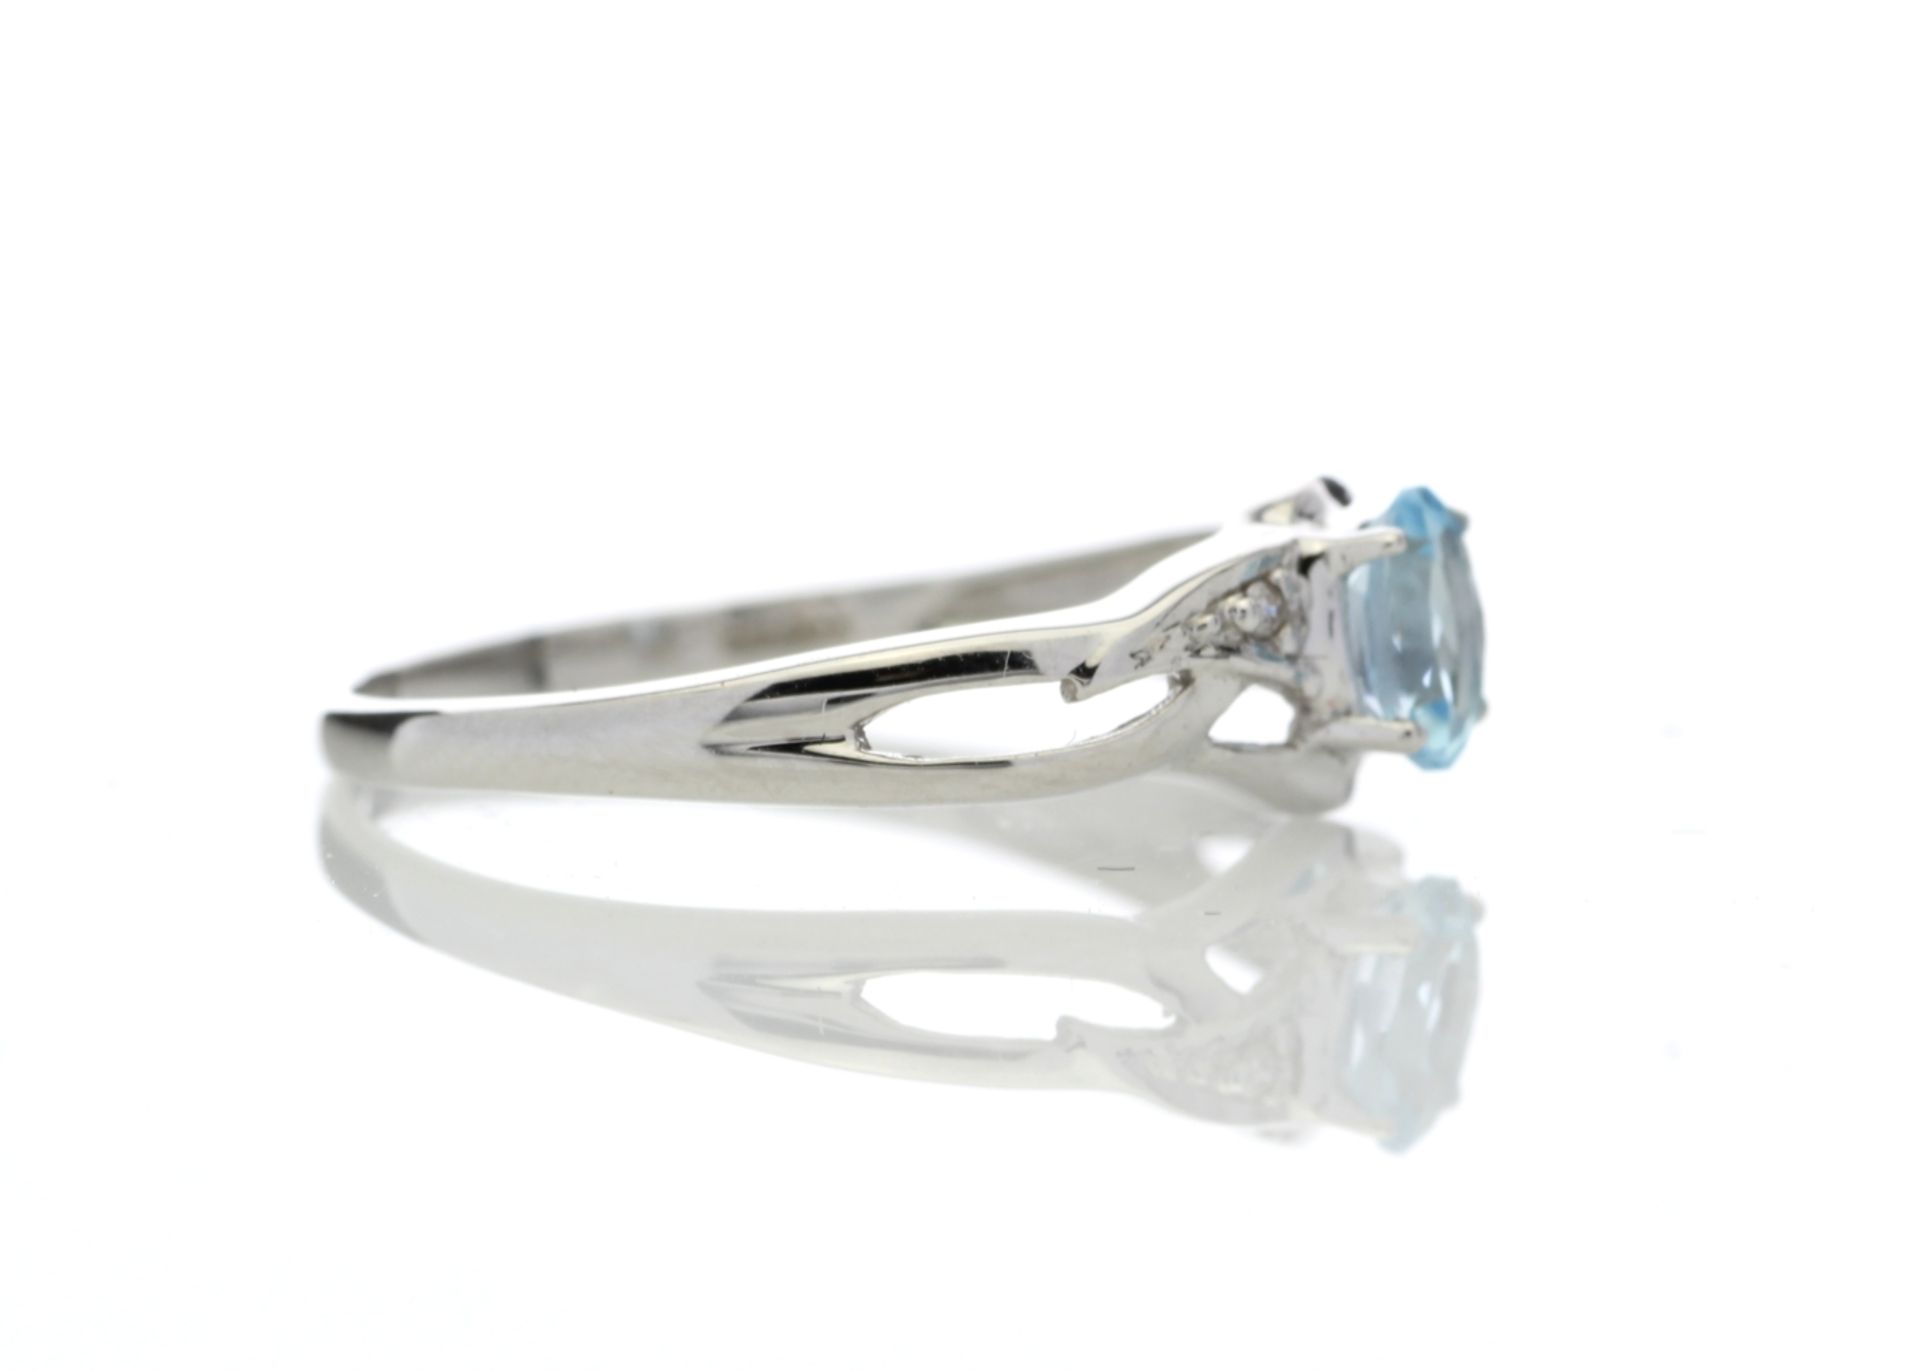 9ct White Gold Fancy Cluster Diamond And Blue Topaz Ring 0.01 Carats - Valued by GIE £609.00 - 9ct - Image 3 of 5